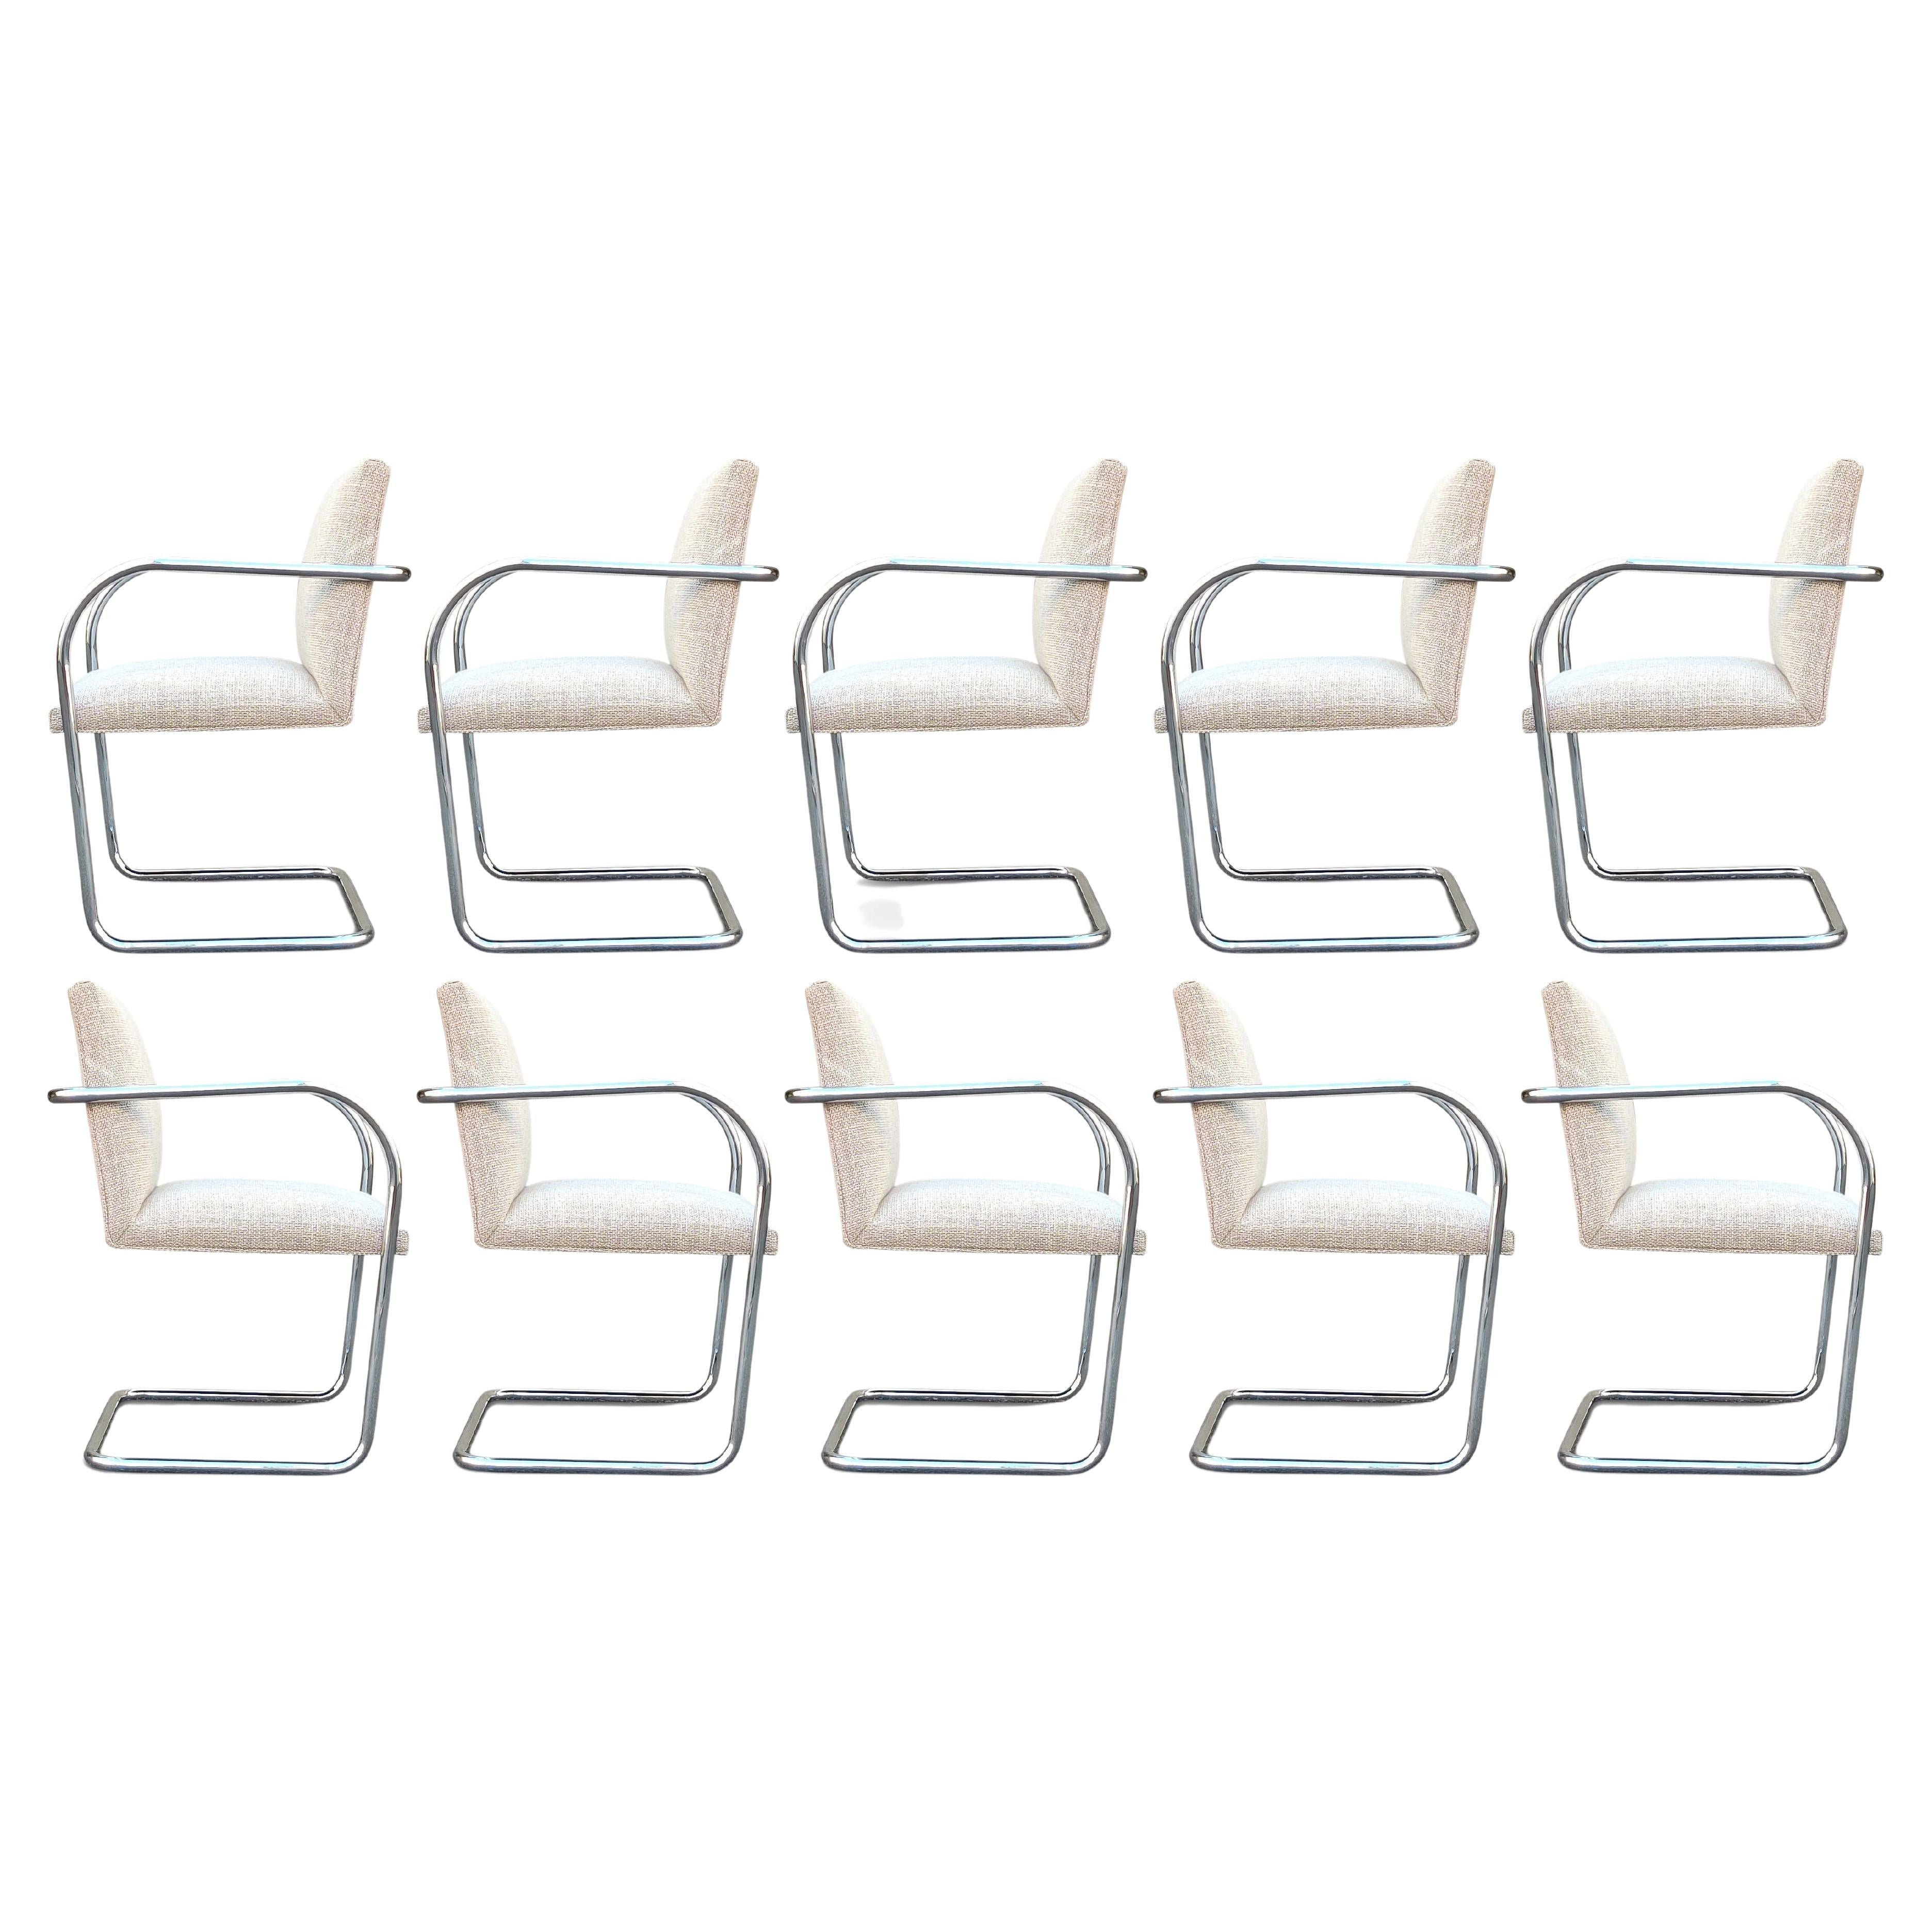 Set of Ten (10) Knoll Mies van der Rohe Tubular Brno Dining Chairs in Wool Blend